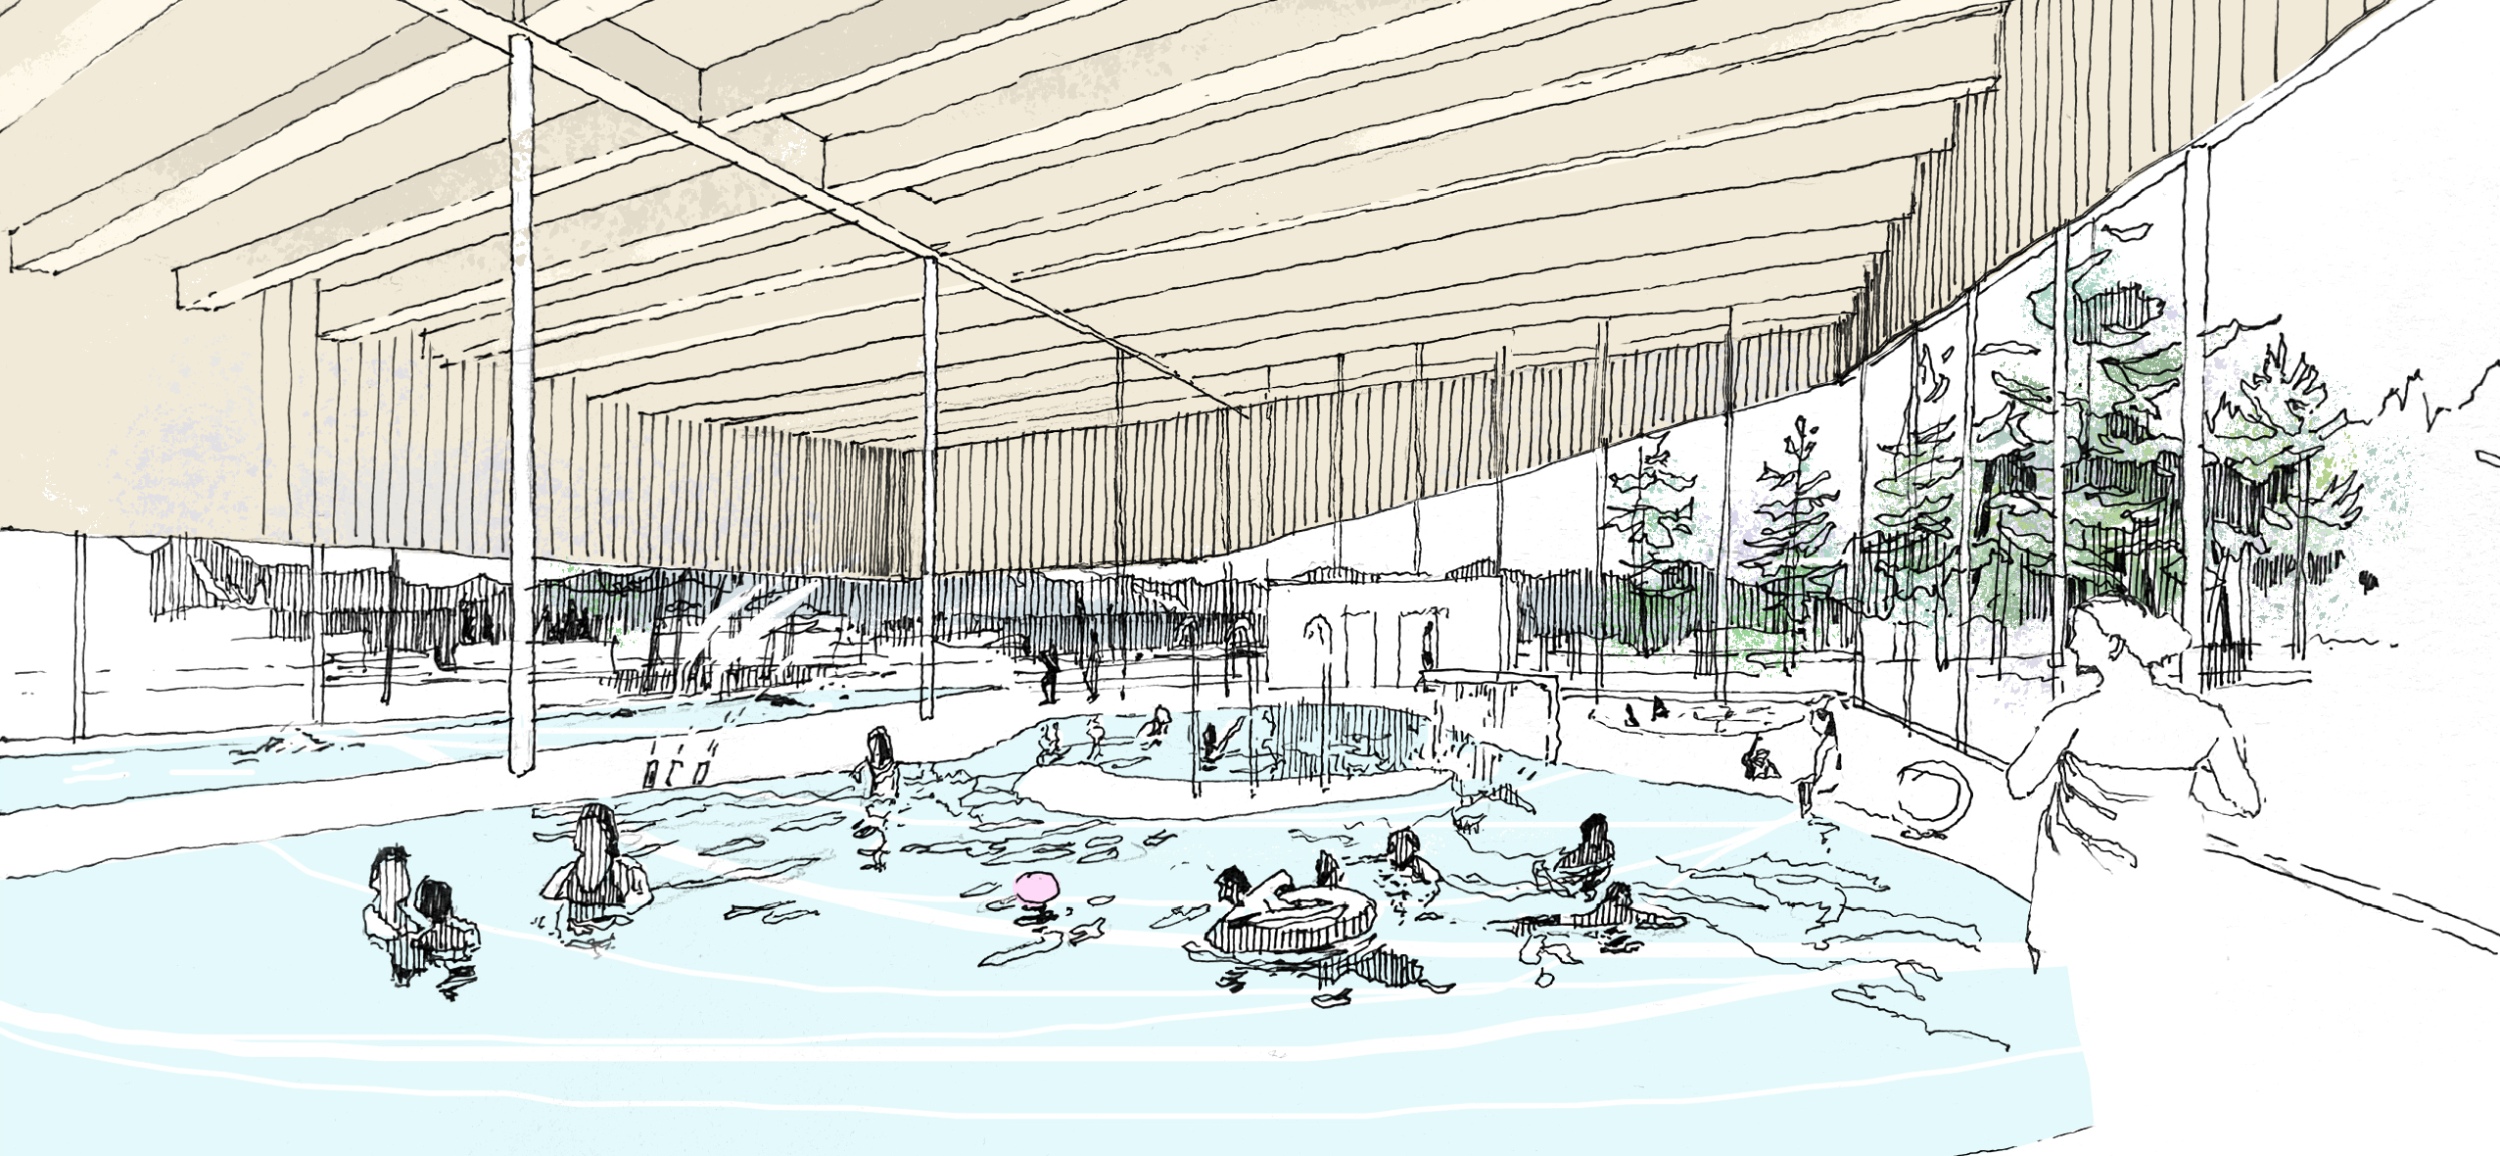 Illustration of people swimming in a pool under a ceiling made of wood.